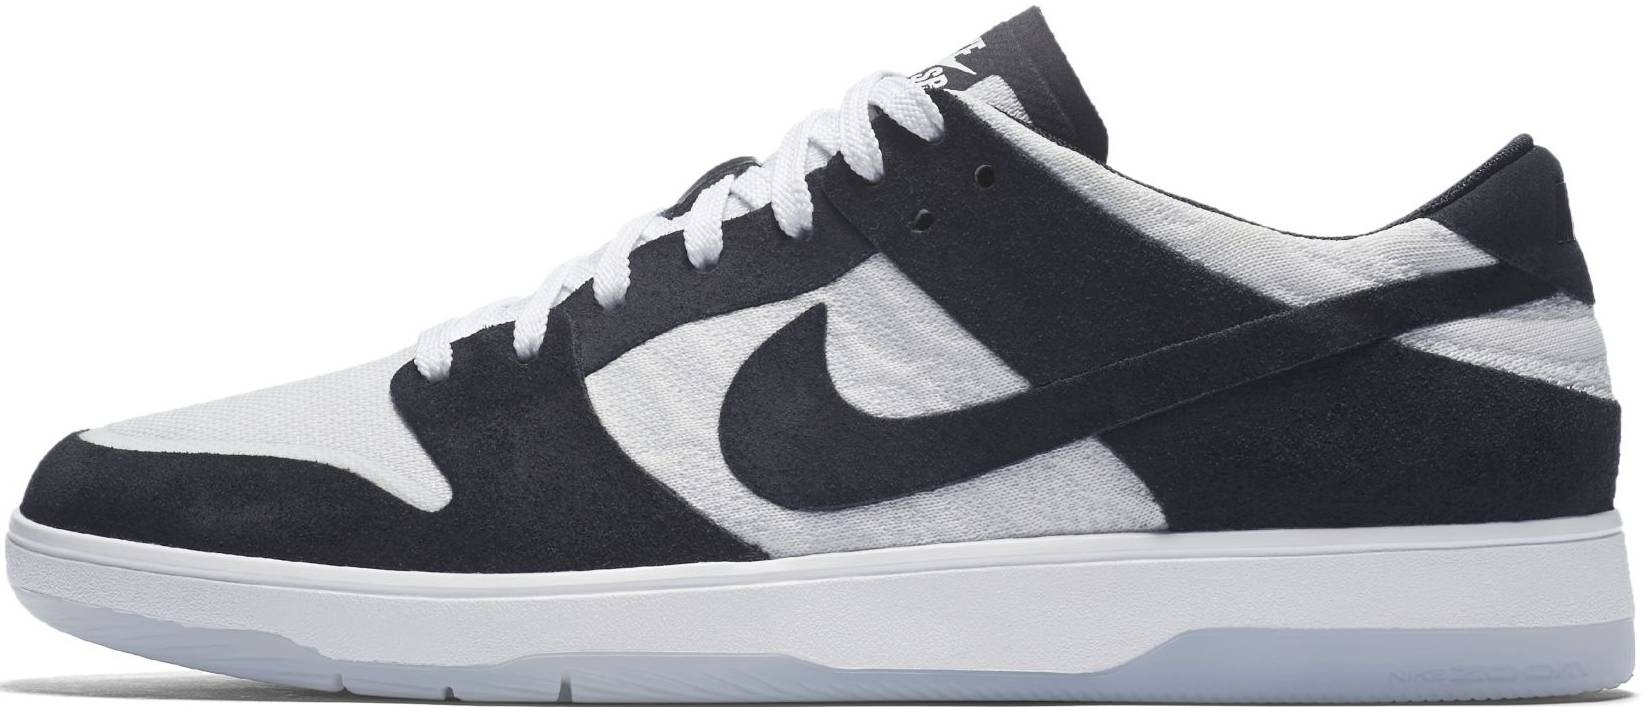 black and white low top nikes